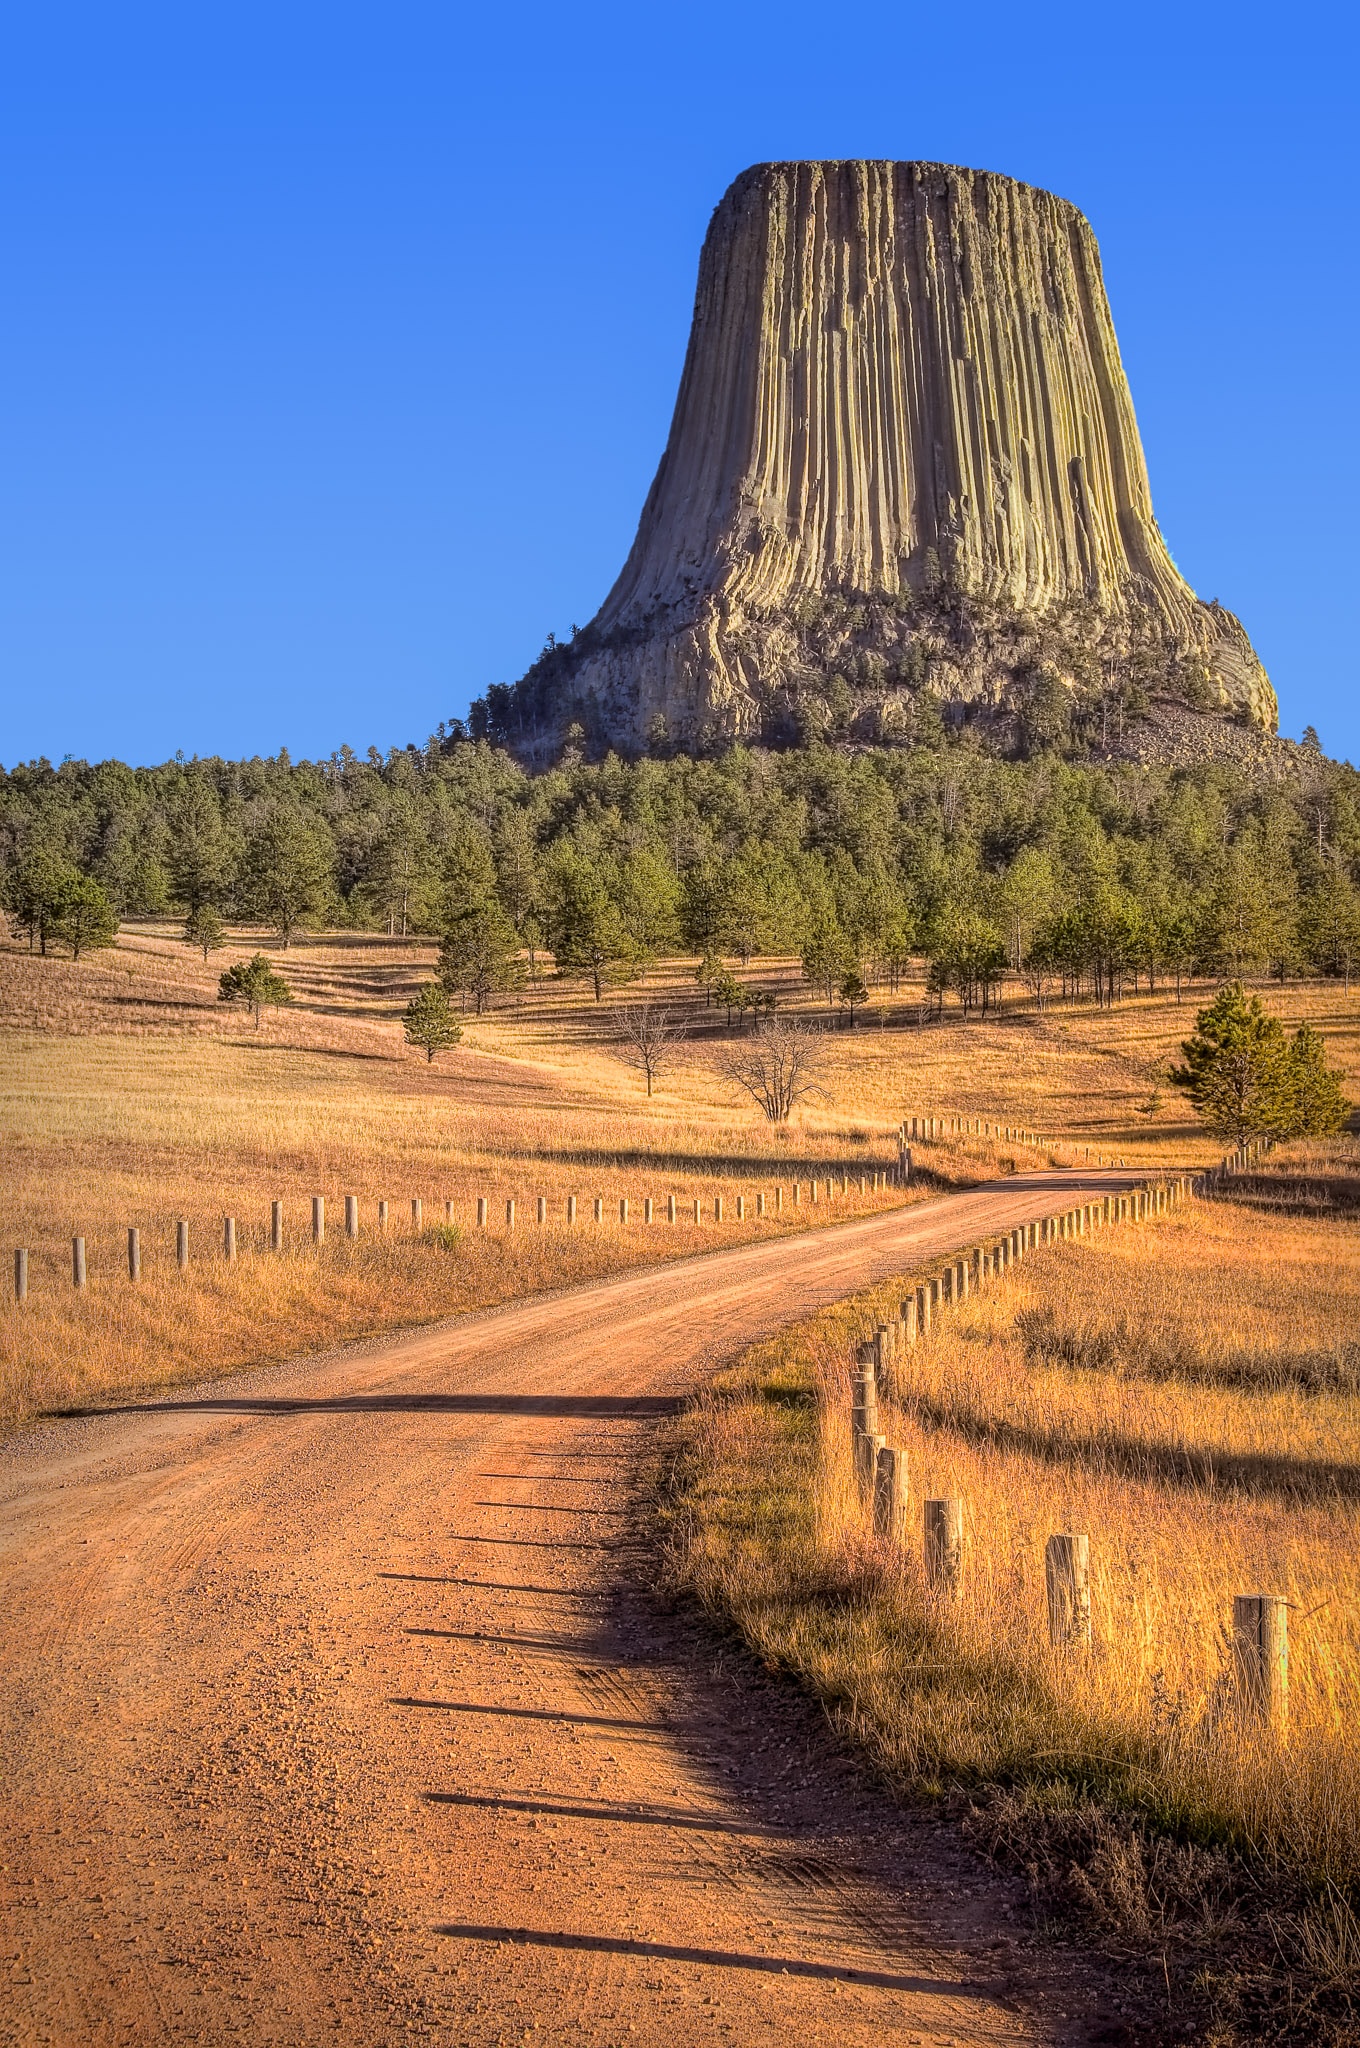 A curved dirt road leads through golden grass toward the volvanic stock called Devils Tower in Devils Tower National Monument in Wyoming.